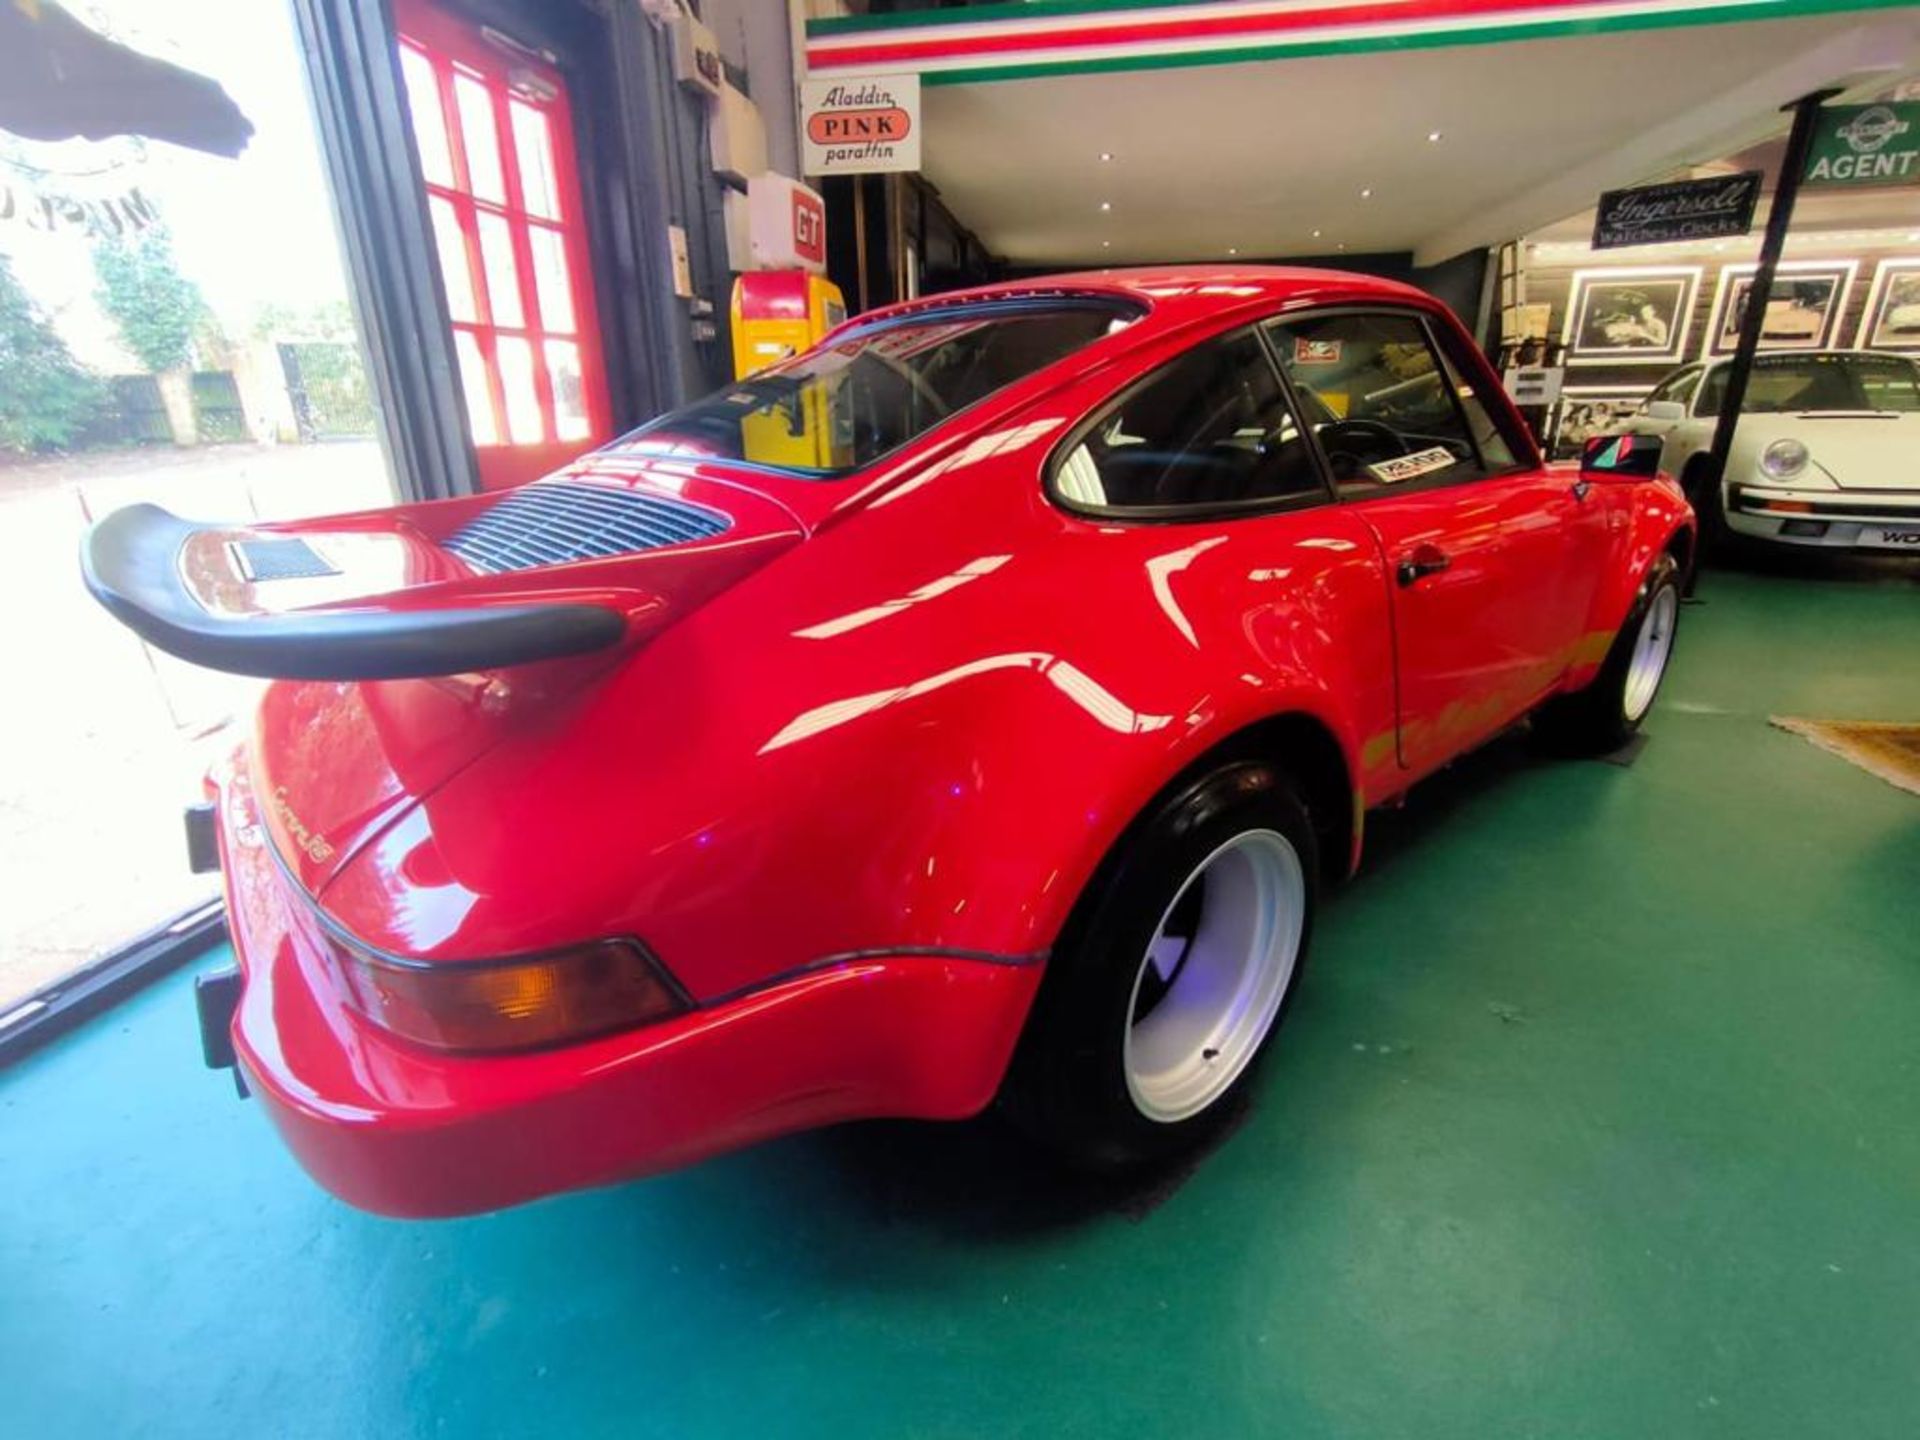 1980 PORSCHE 911 SC SPORT WHICH HAS BEEN FULLY REBUILT TO BE IDENTICAL TO A 1974 911 RSR *NO VAT* - Image 3 of 12